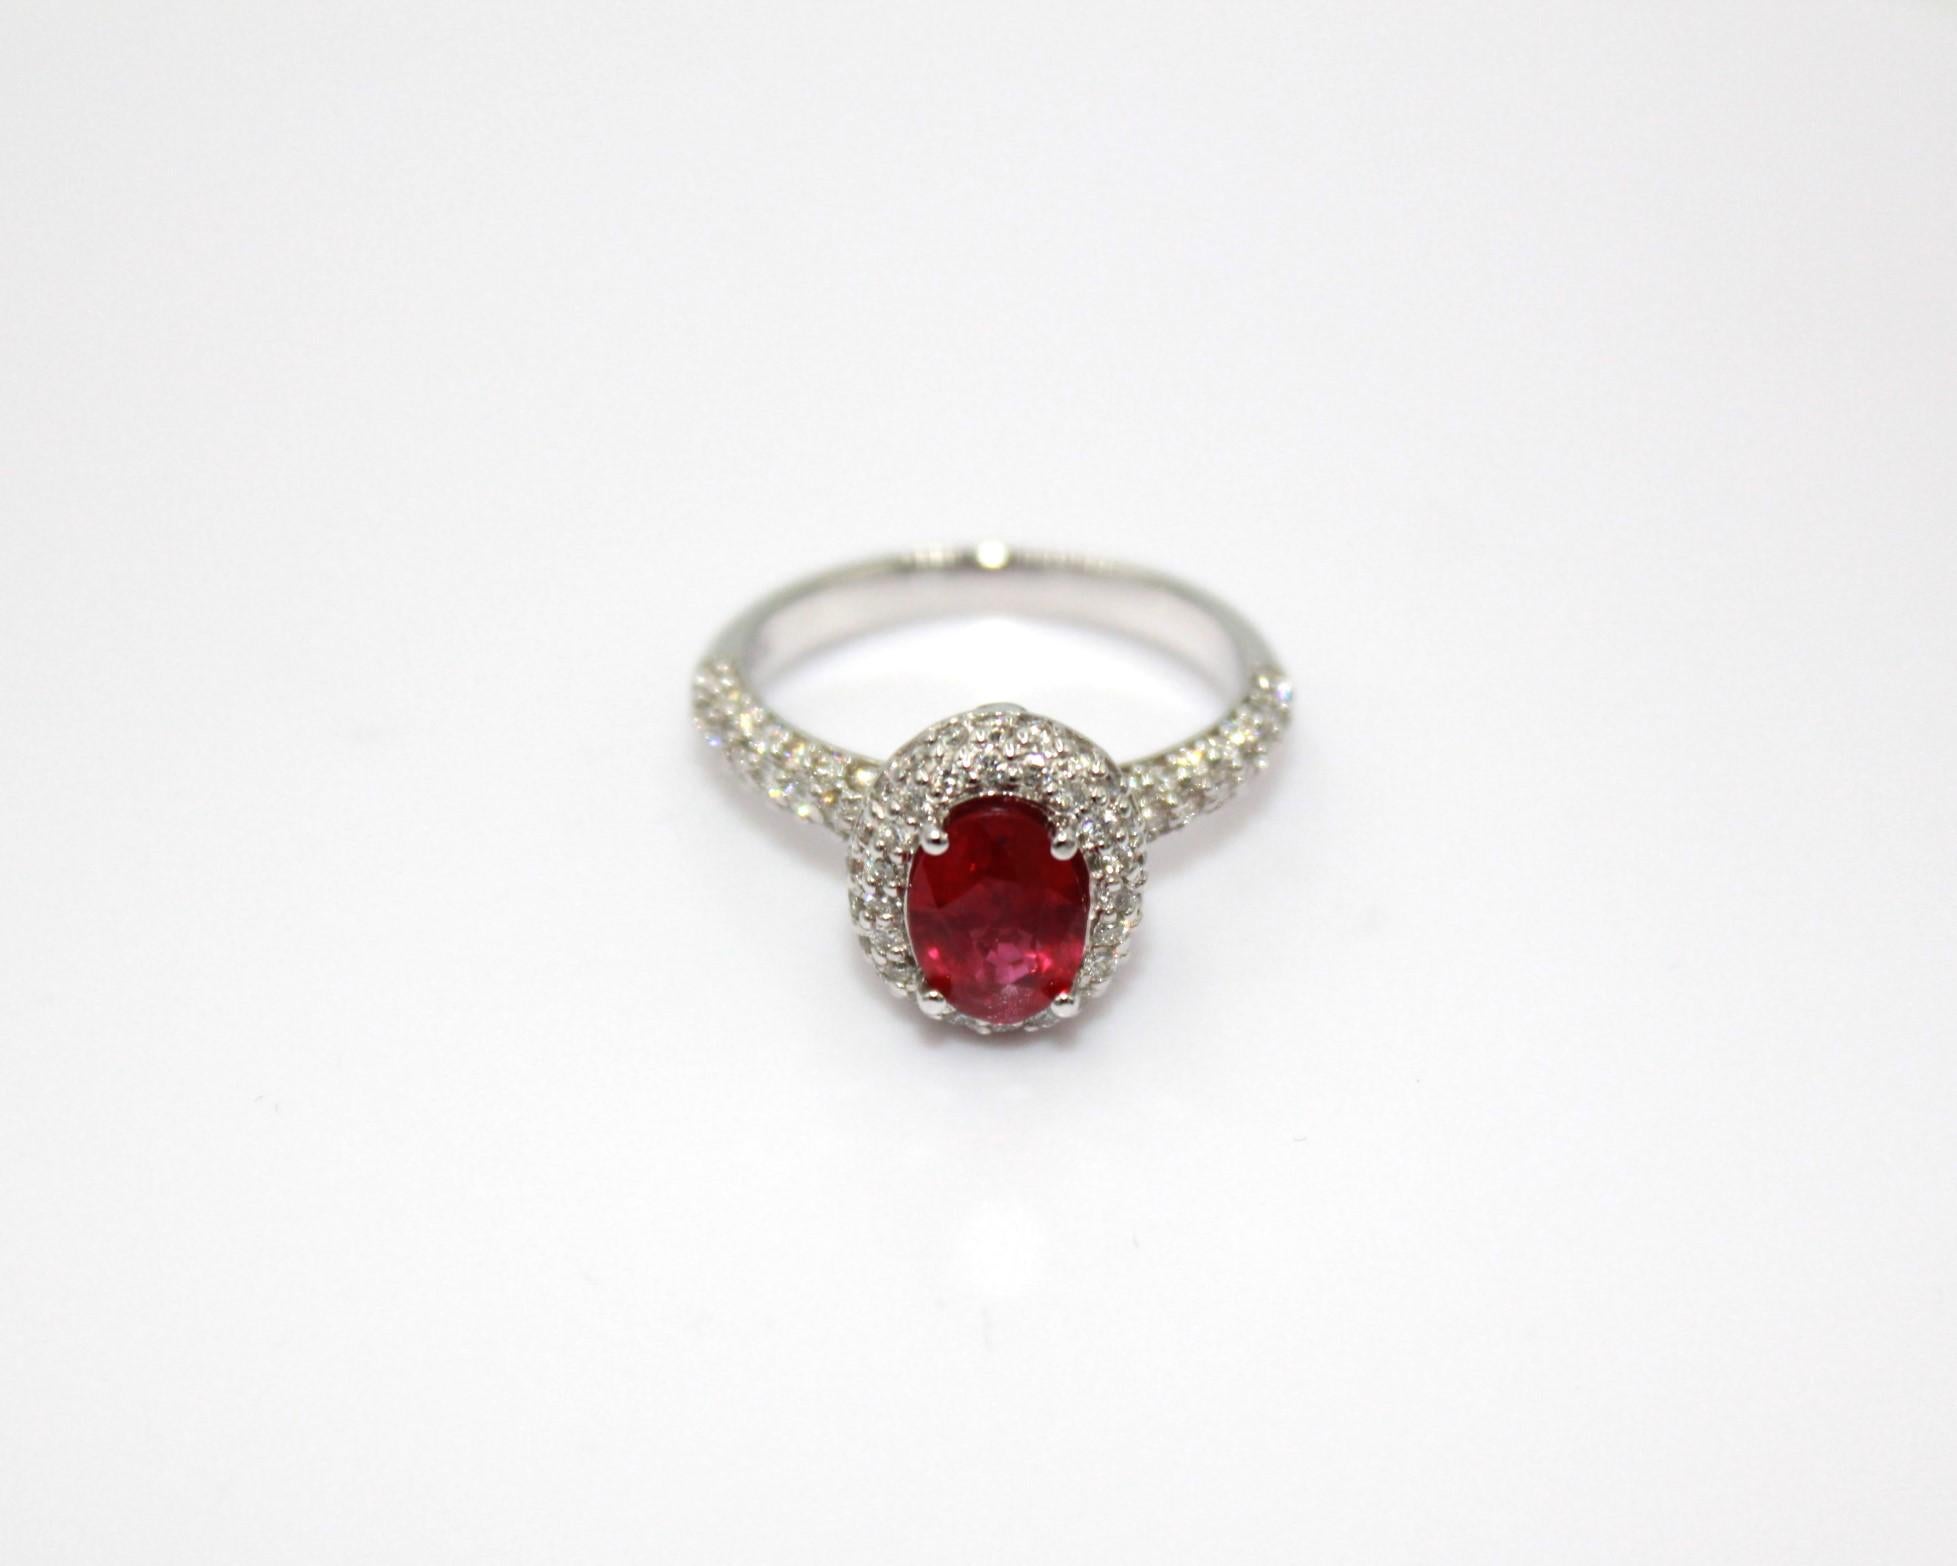 1.36 carats oval Burma Ruby, framed with 83 round diamonds, totaling a diamond weight of 0.61 carat. 

This stunning Ruby Diamond Ring will highlight your elegance and uniqueness. 

Item Details:
- Type: Ring
- Metal: 18K Gold
- Weight: 4.70